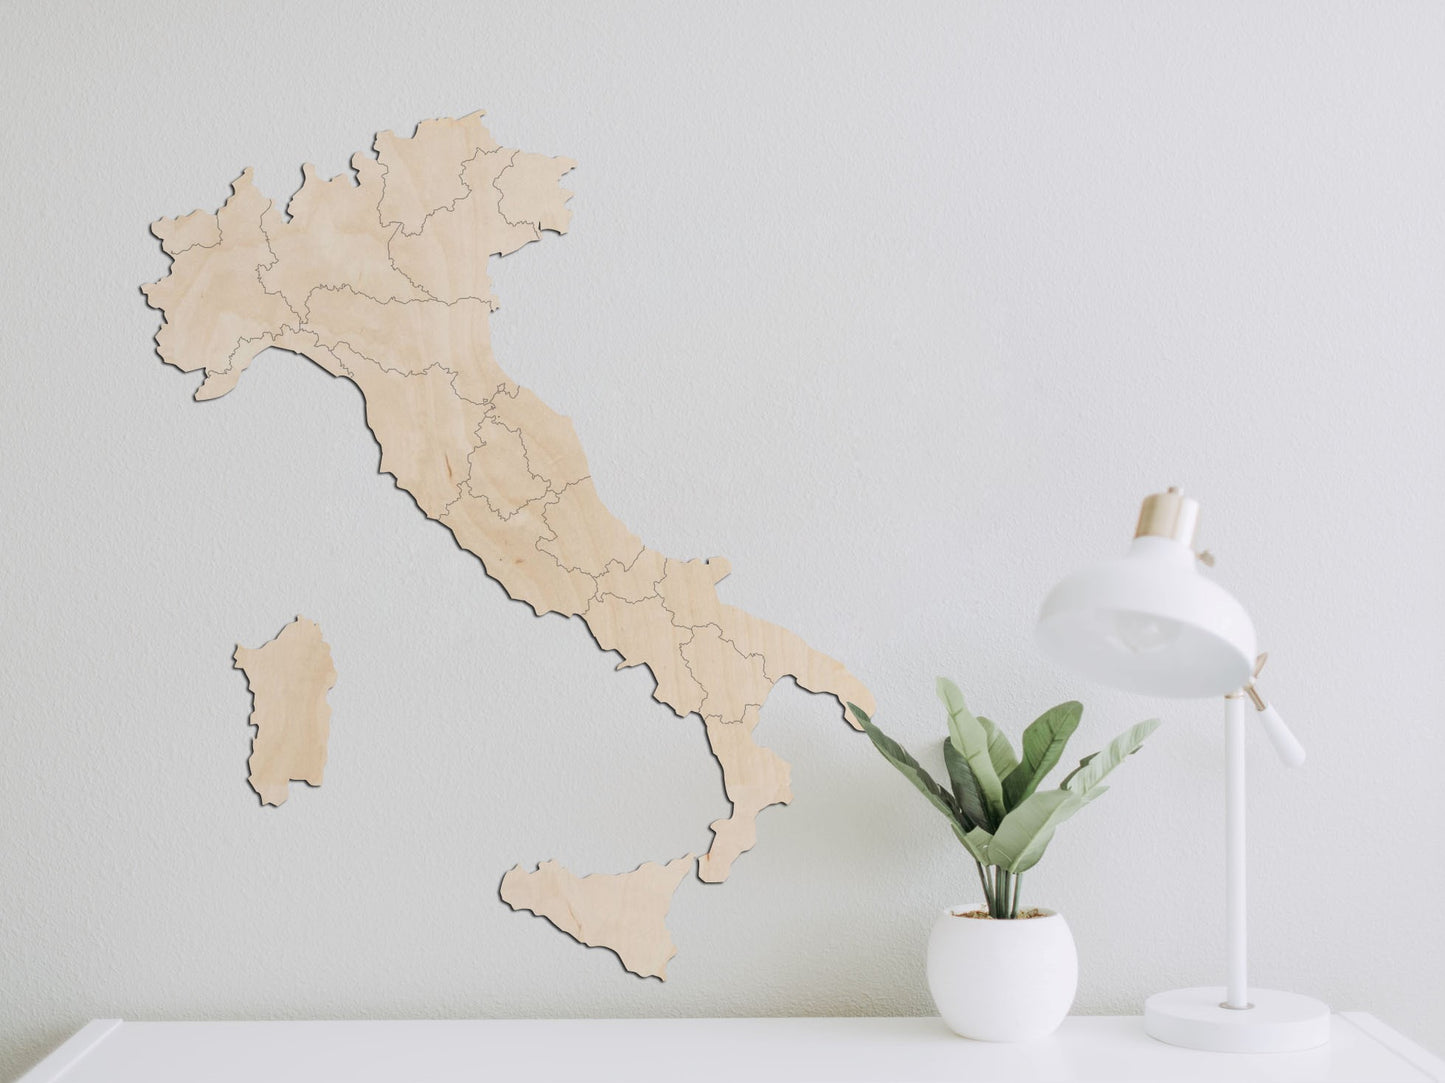 Laser-cut wooden map of Italy